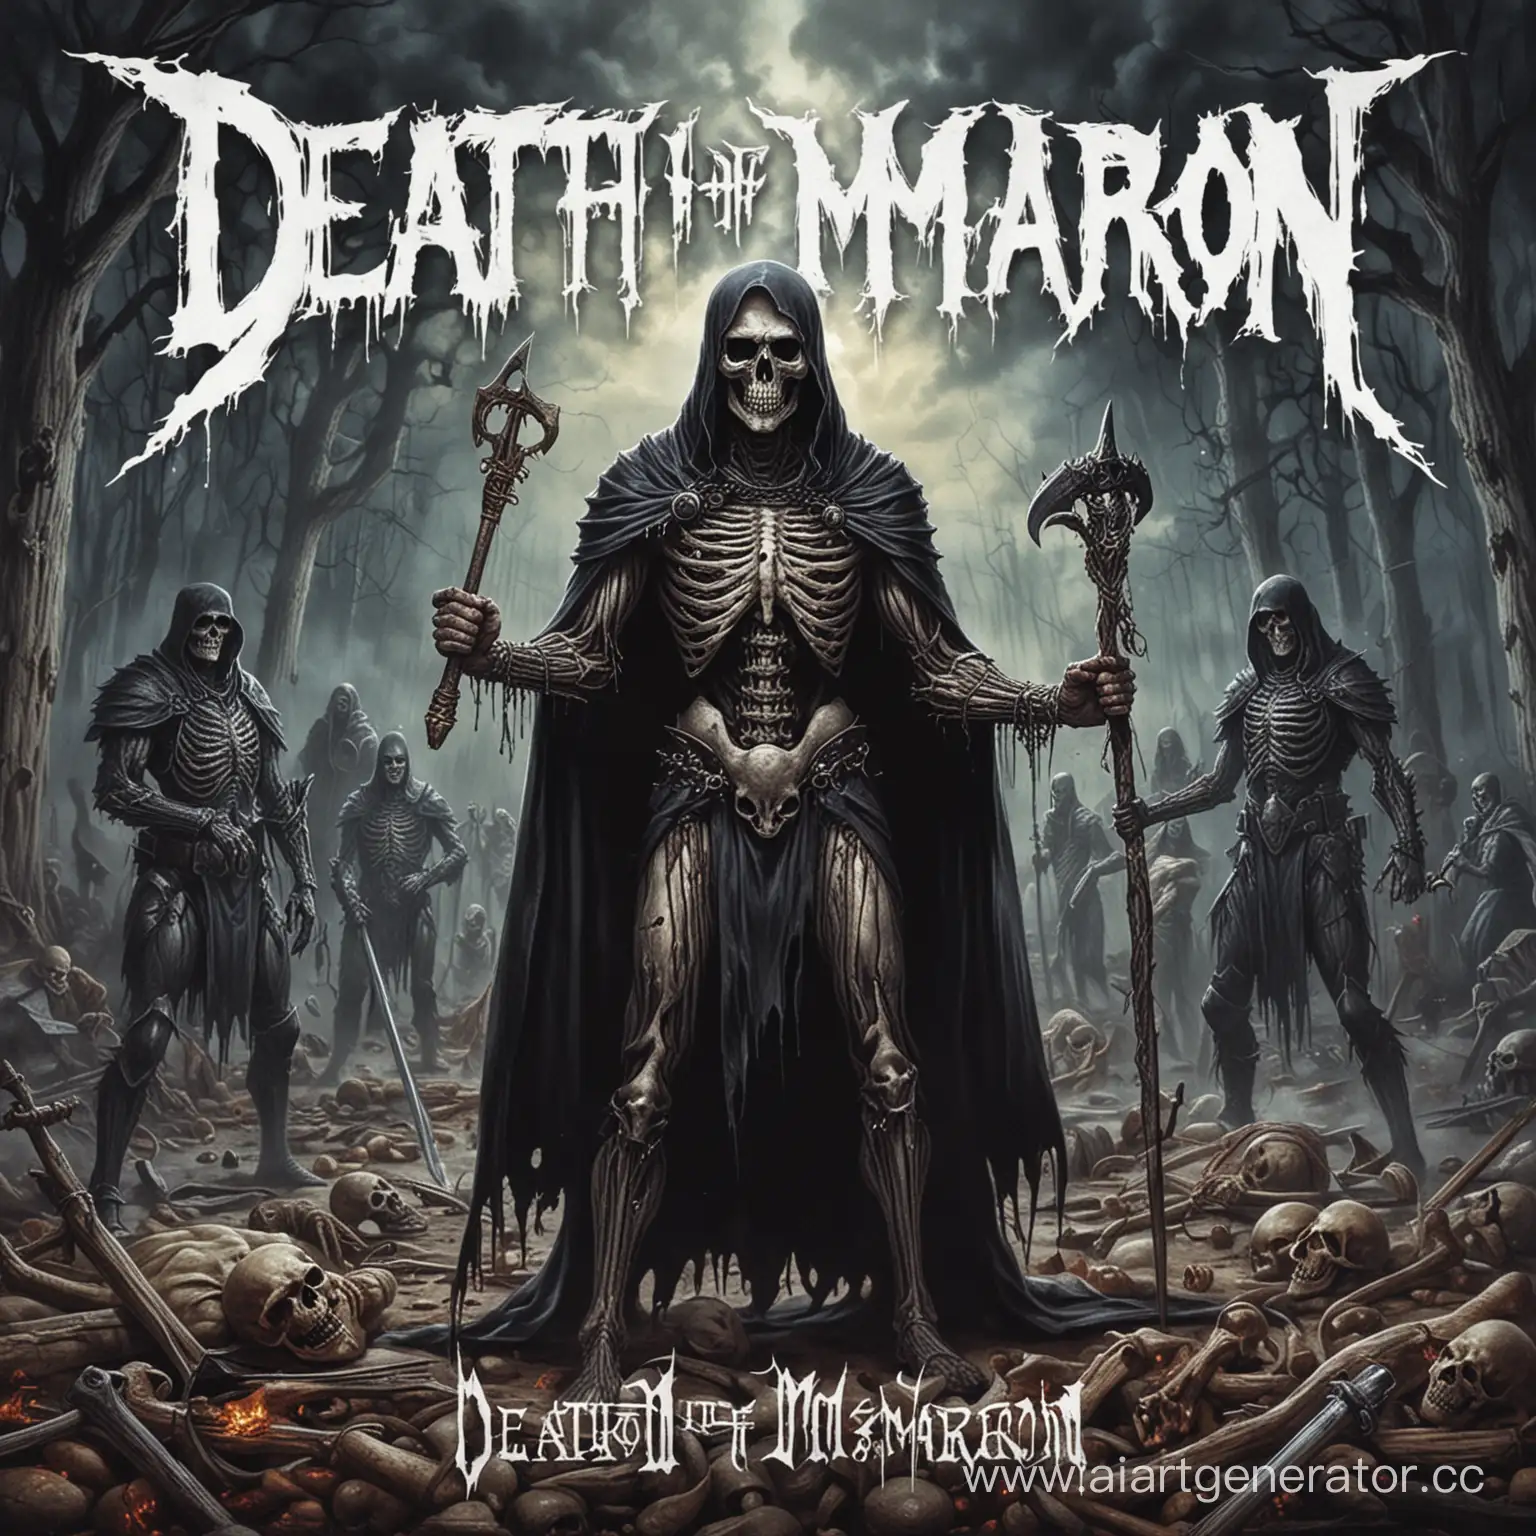 Metal-Band-Death-of-Makaron-Album-Cover-with-Dark-Aesthetic